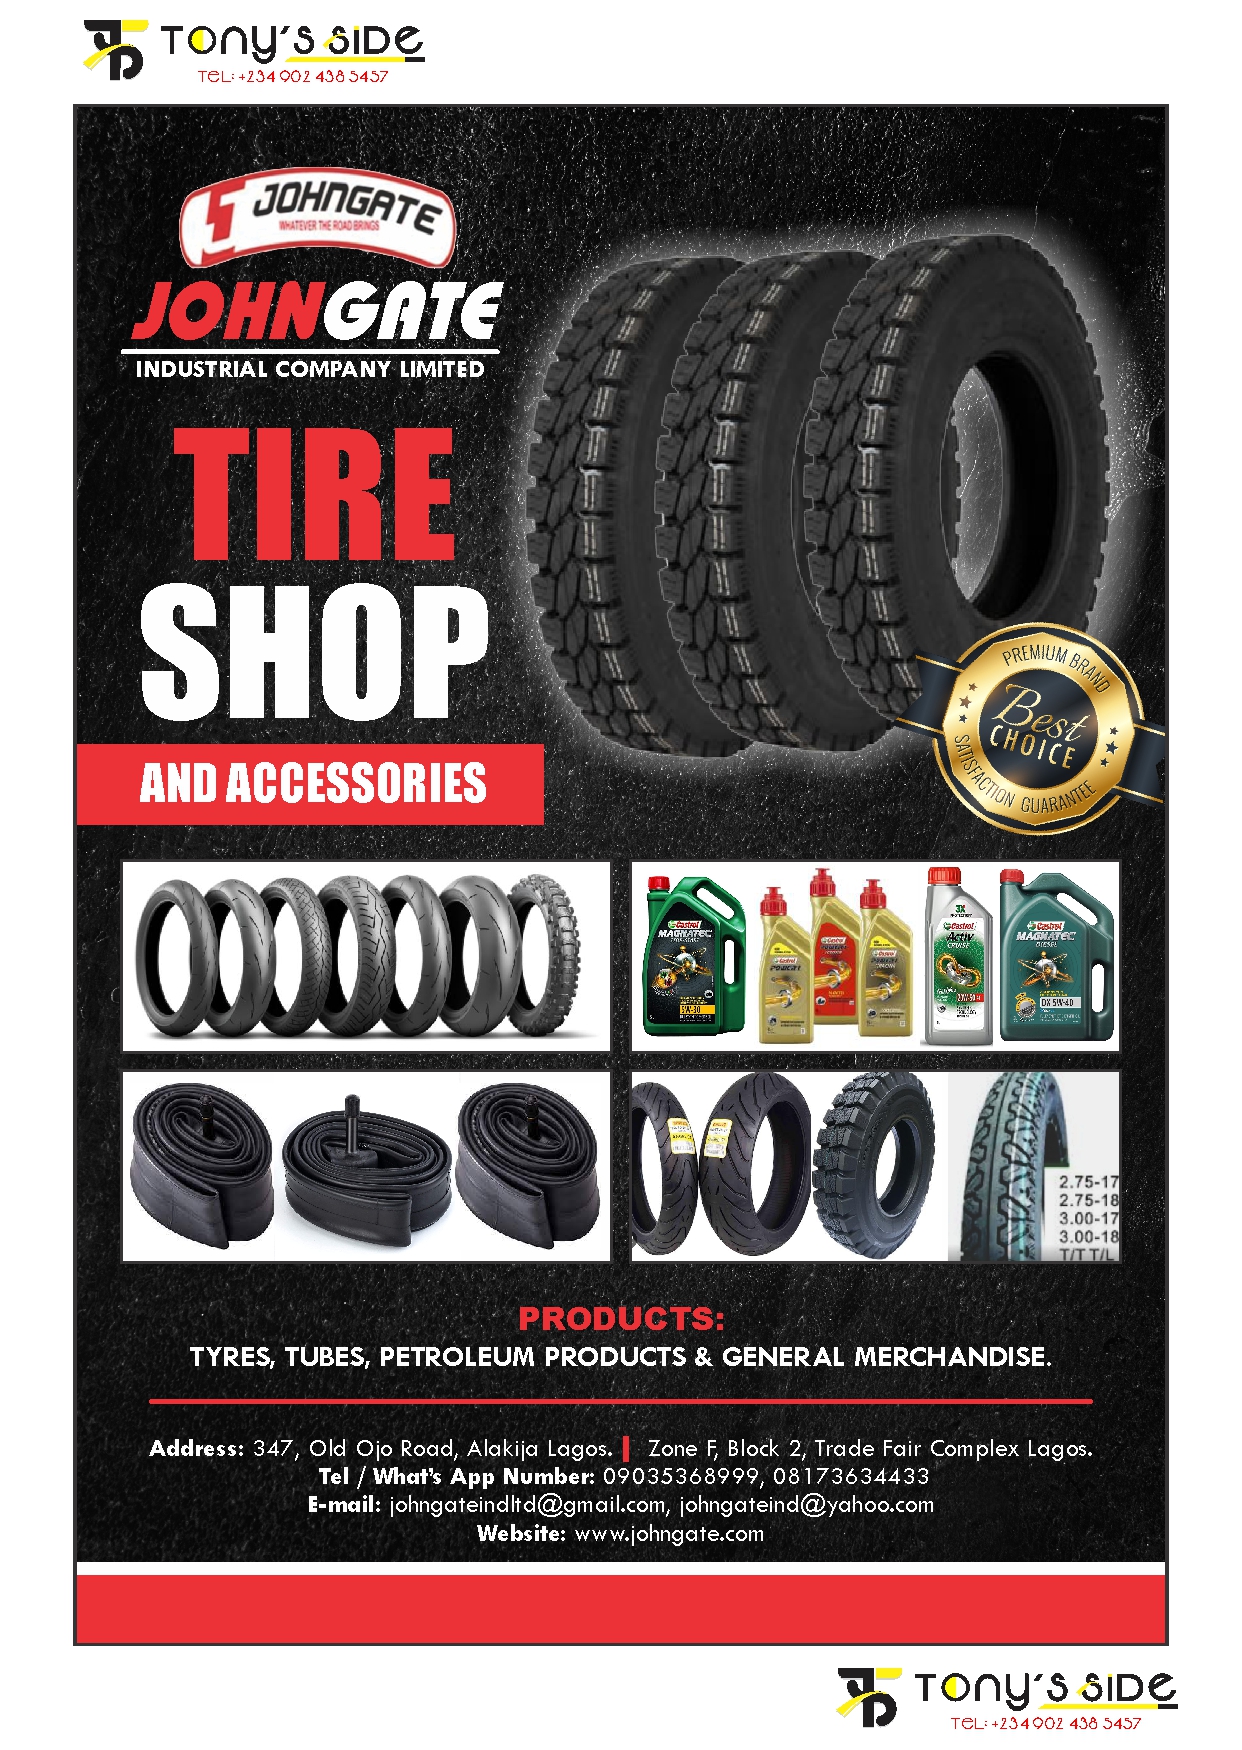 JOHNGATE MOTORCYCLE TYRES is available at Efritin